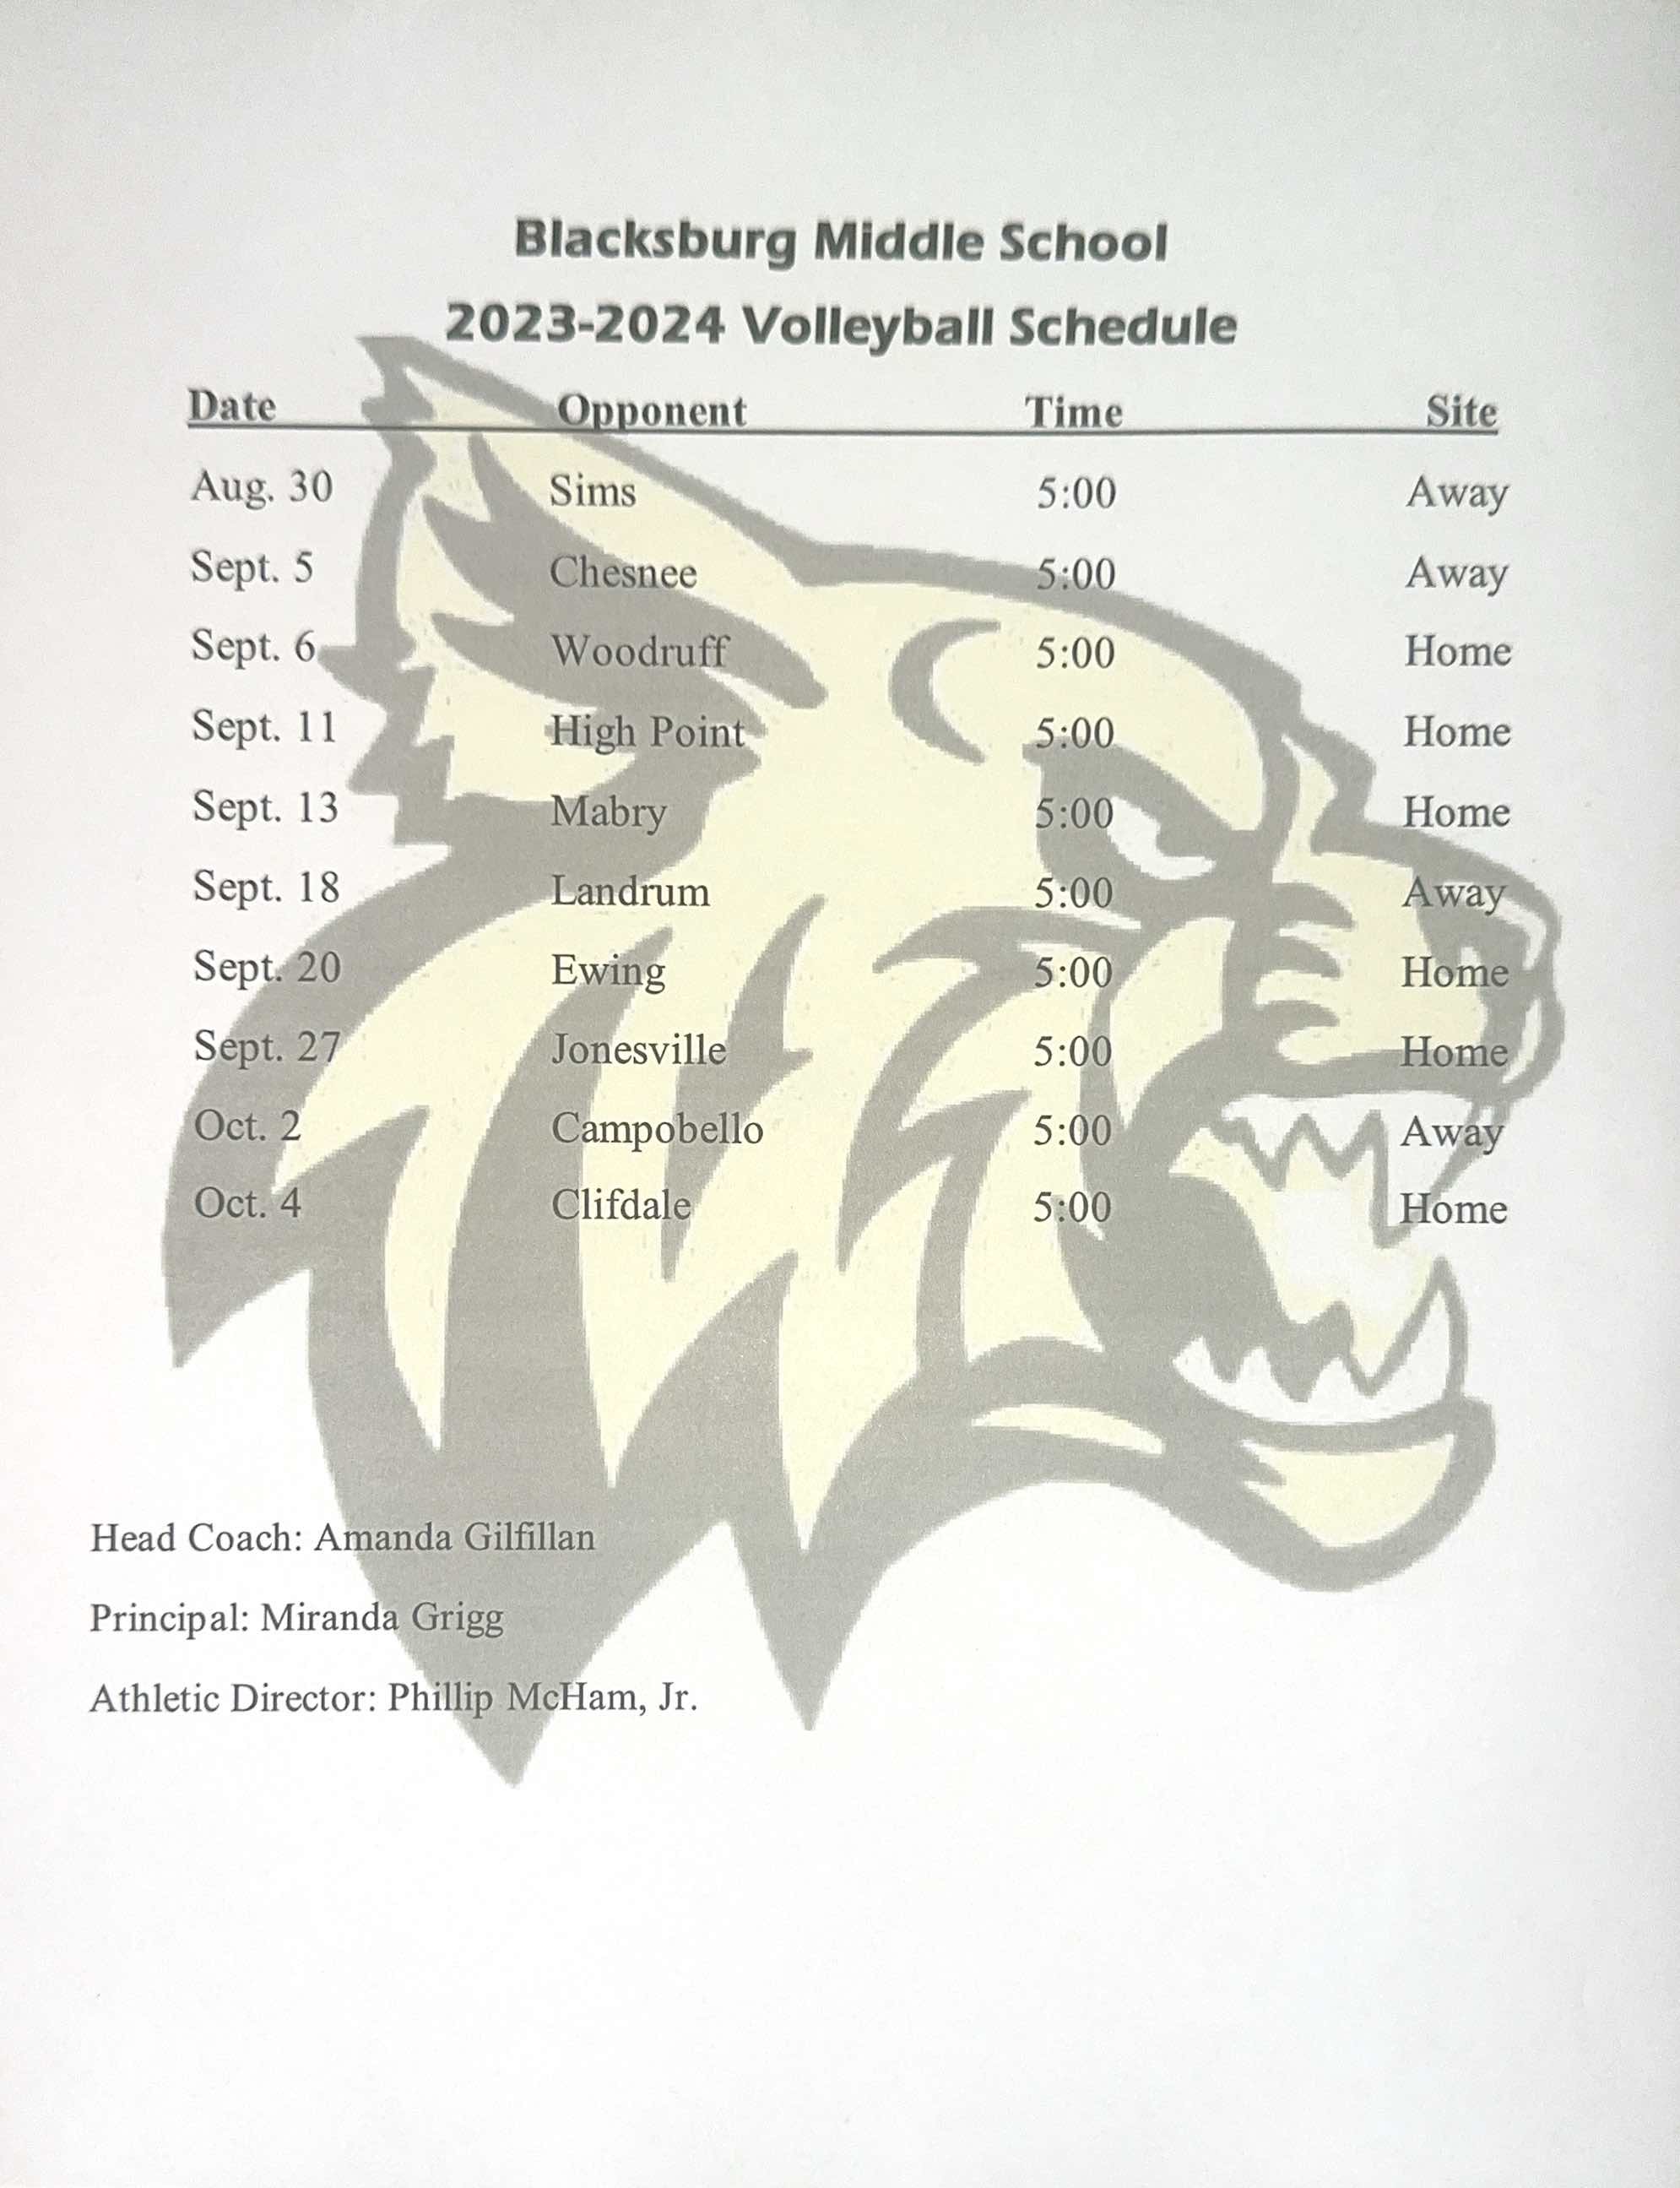 middle school volleyball schedule 23-24